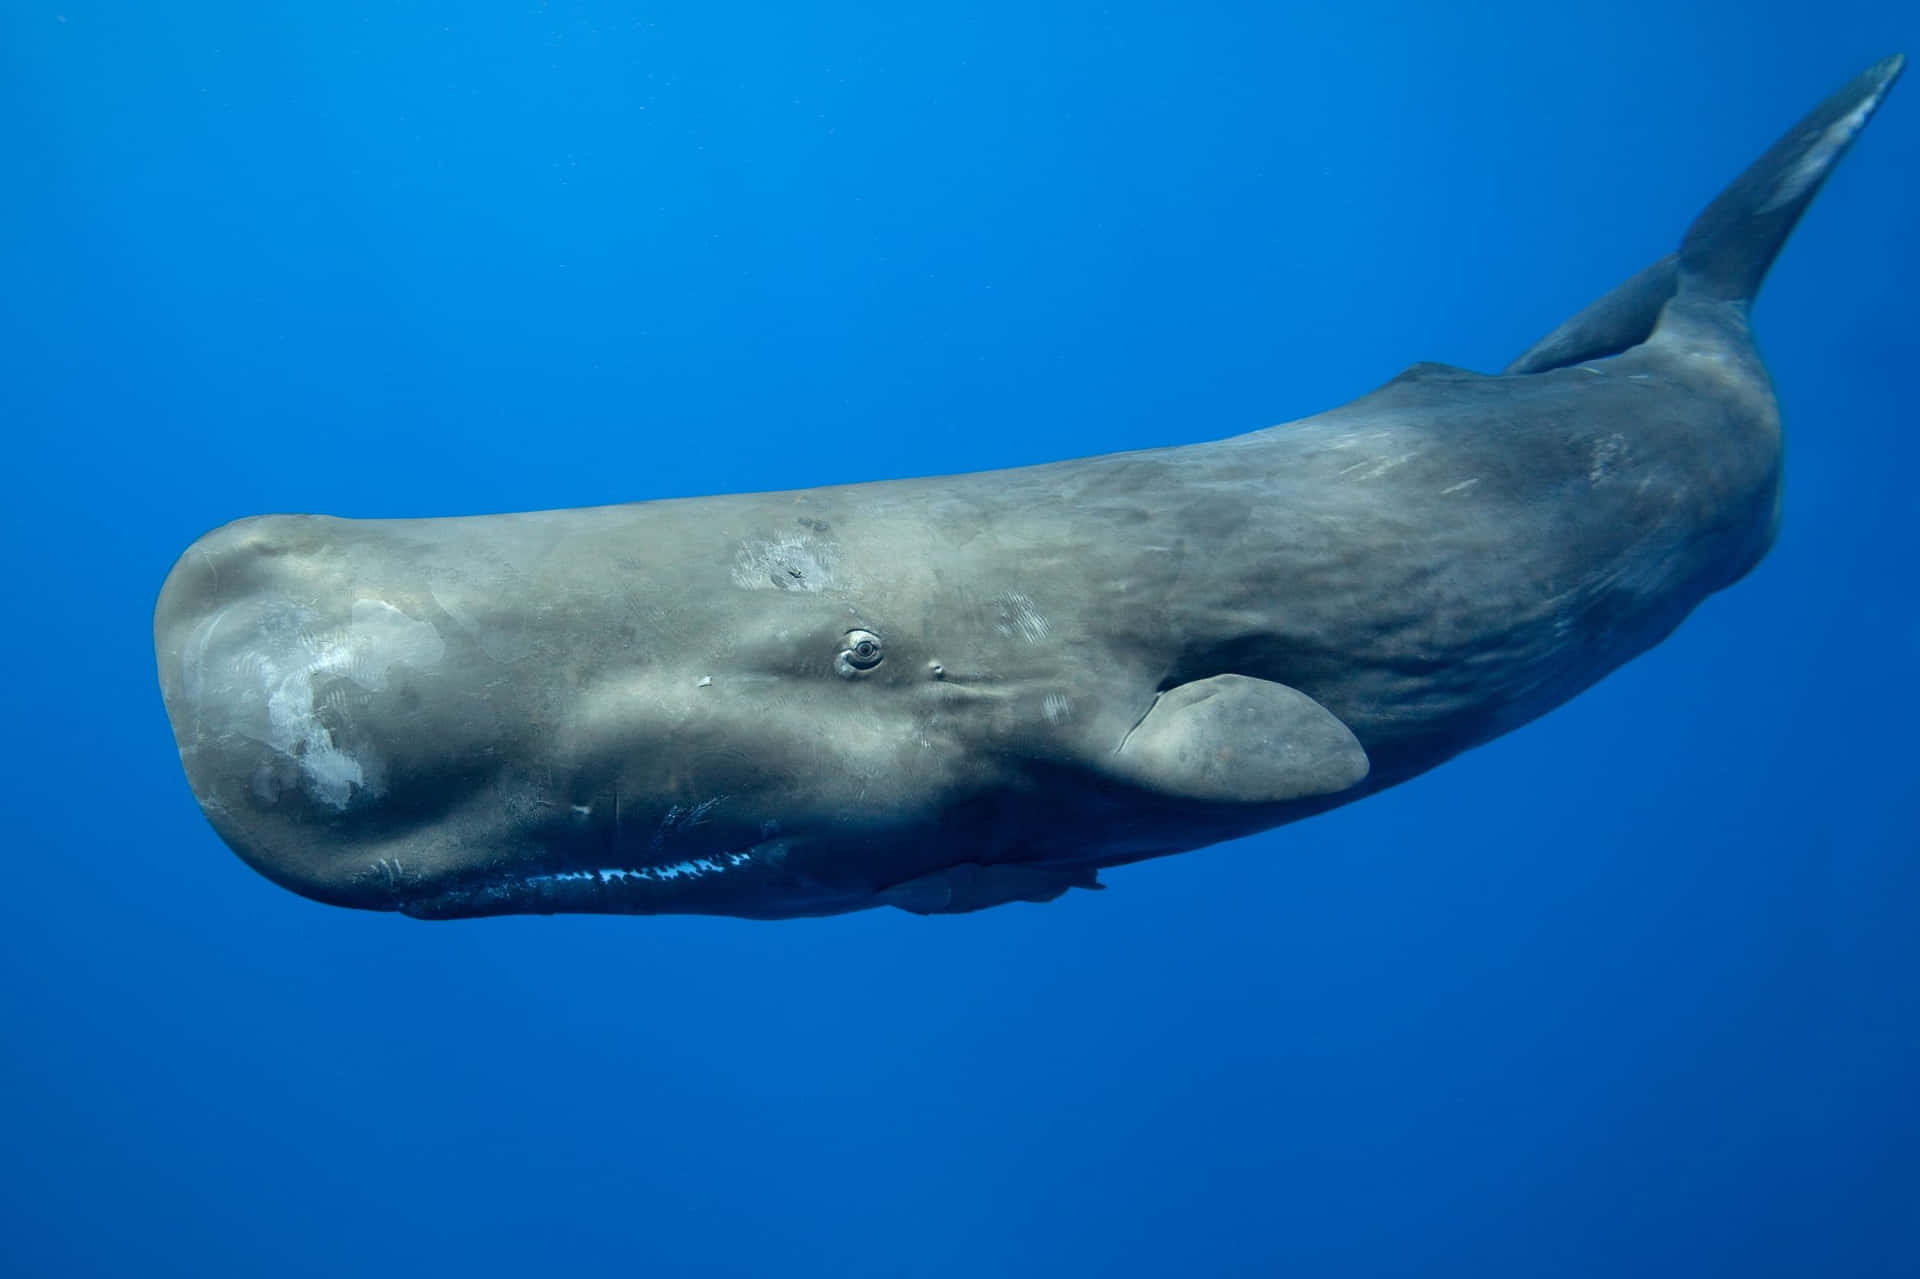 A majestic sperm whale spotted in the Indian Ocean